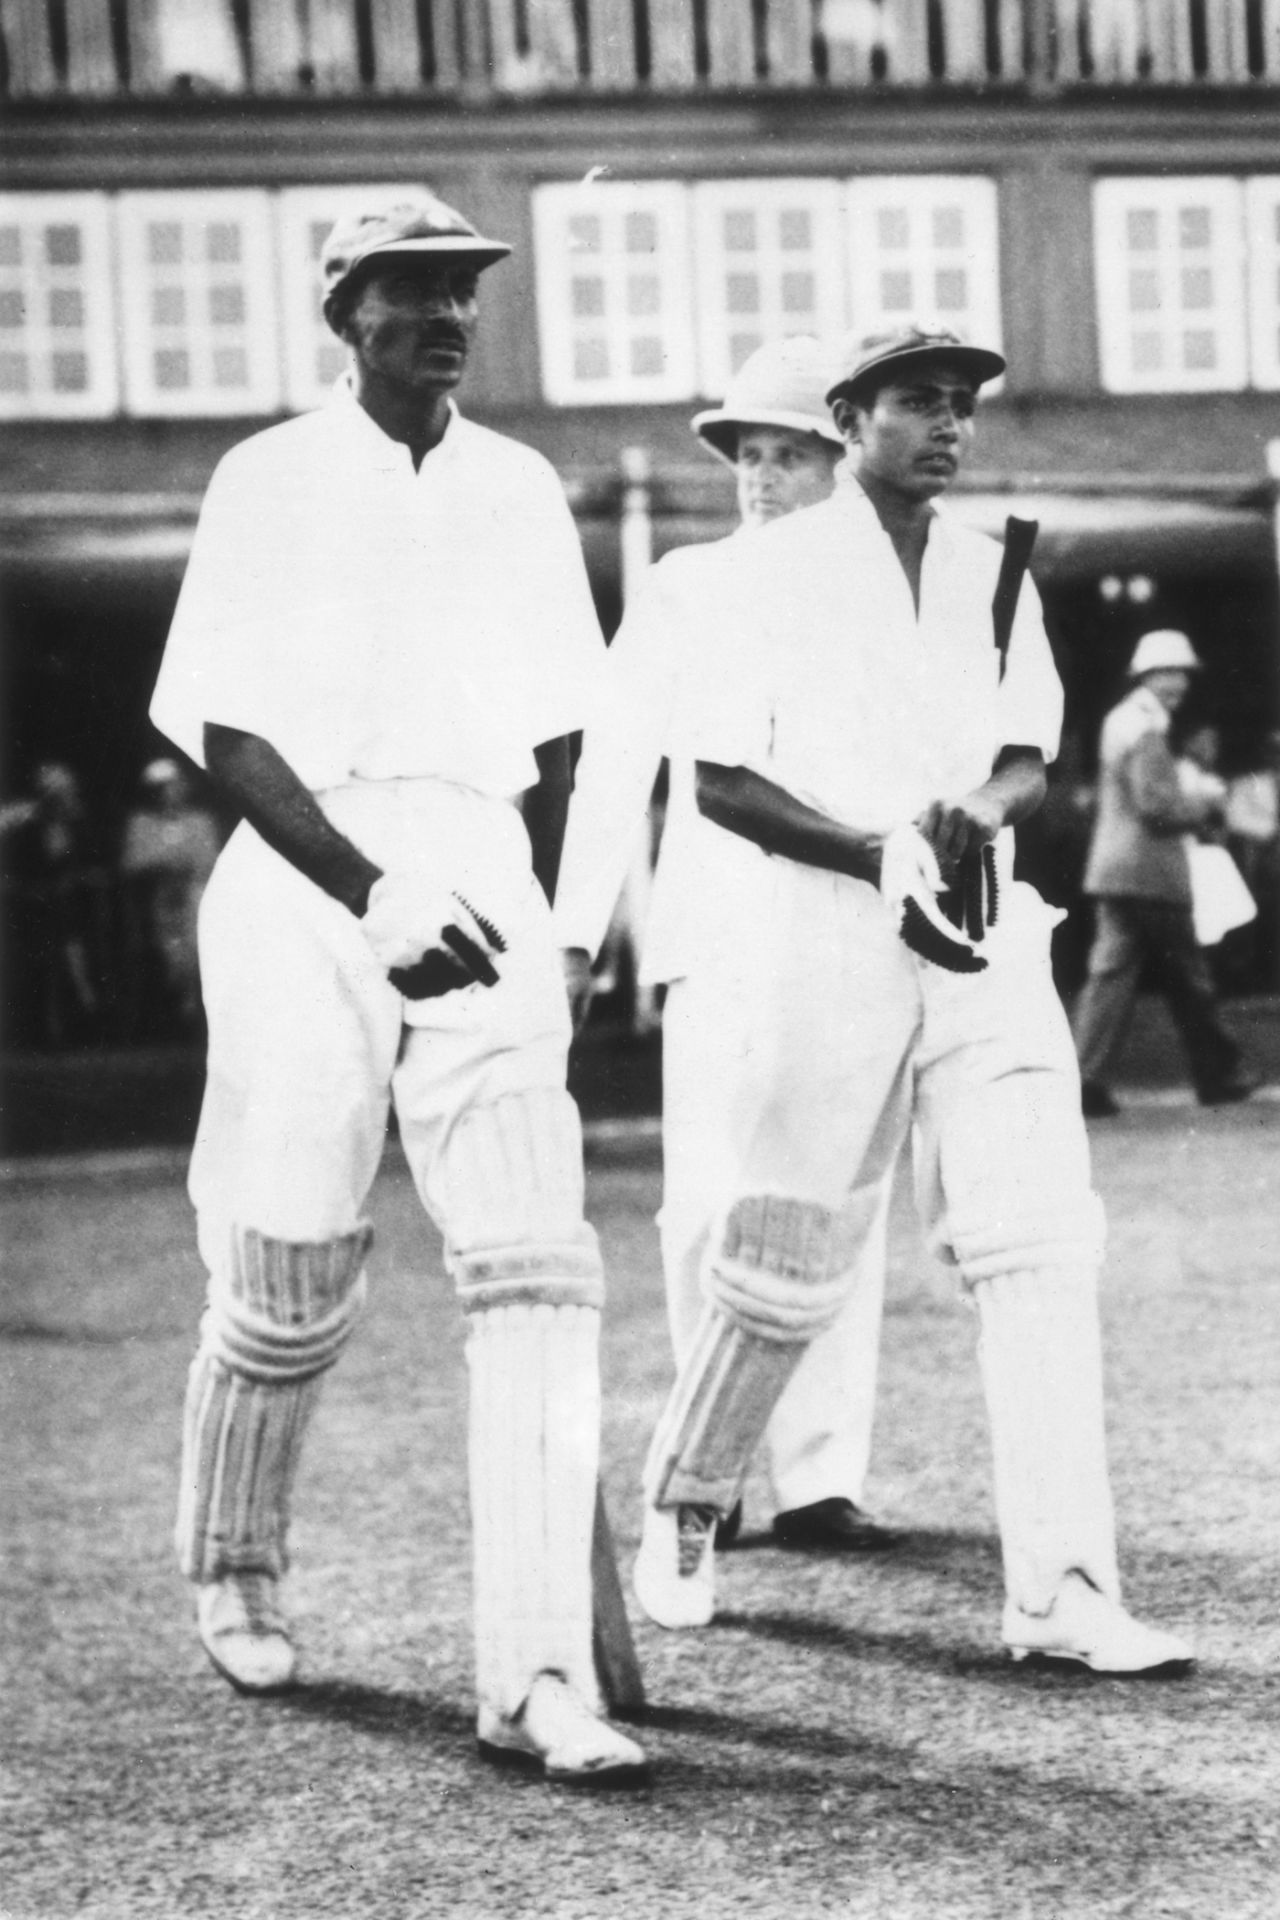 CK Nayudu and Lala Amarnath walk out to bat in India's first home Test, first day, first Test, India vs England, Bombay Gymkhana Ground, Mumbai, December 18, 1933